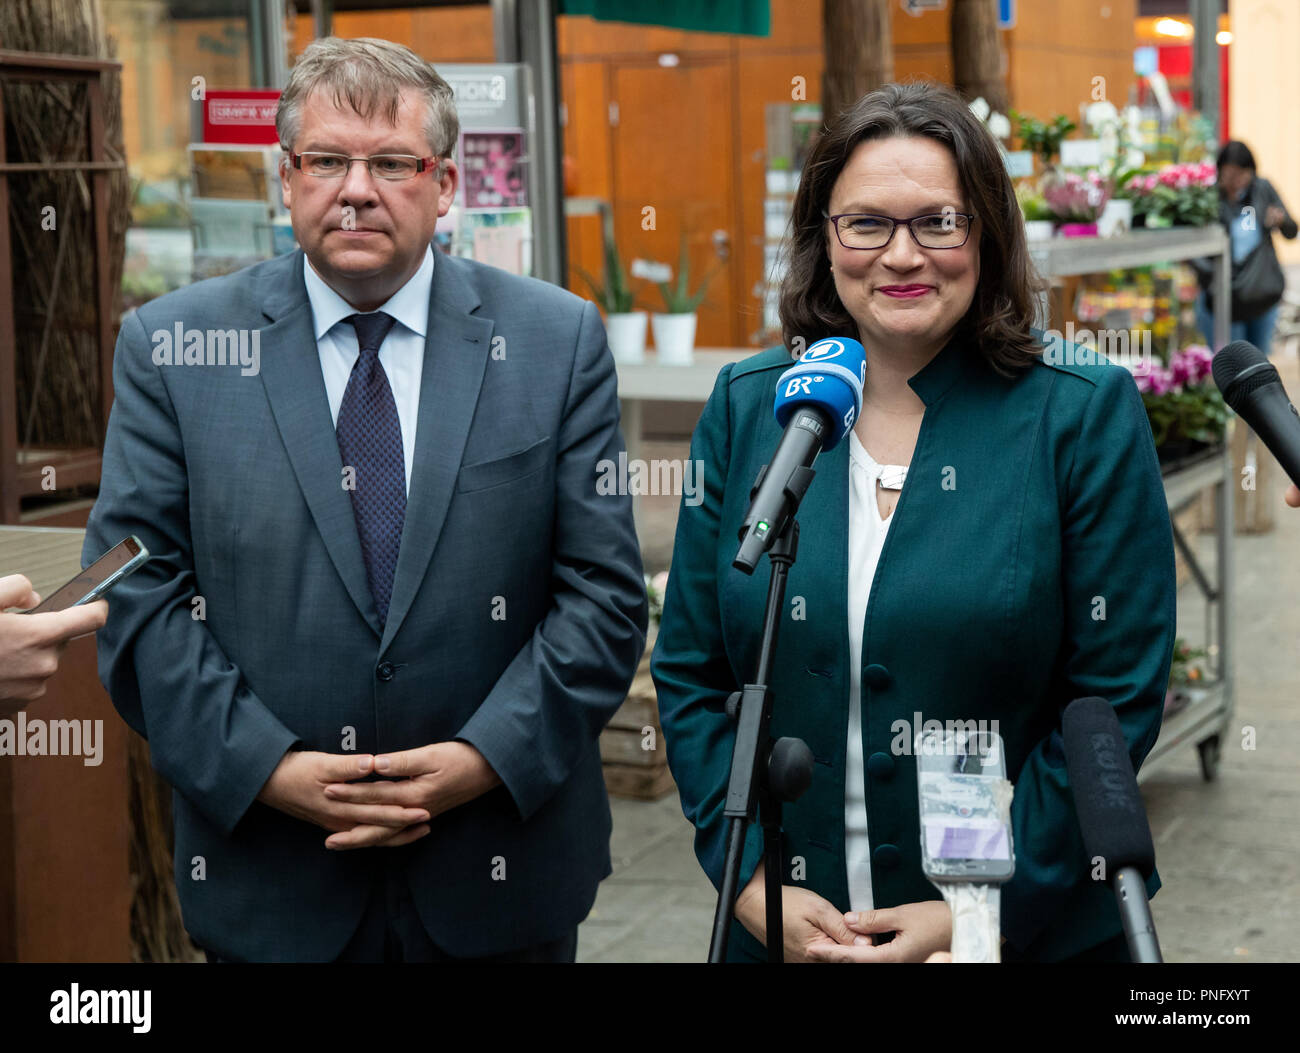 Wuerzburg, Bavaria. 21st Sep, 2018. Andrea Nahles, chairman of the SPD, commenting on the case of the former President of the Office for the Protection of the Constitution Maassen together with Volkmar Halbleib, the chairman of the SPD subdistrict of Wuerzburg-Land. Nahles has admitted misjudgment in the case of the previous President of the Office for the Protection of the Constitution. She herself, Chancellor Merkel and CSU leader Seehofer, 'we were all three wrong,' said Nahles. Credit: Daniel Karmann/dpa/Alamy Live News Stock Photo